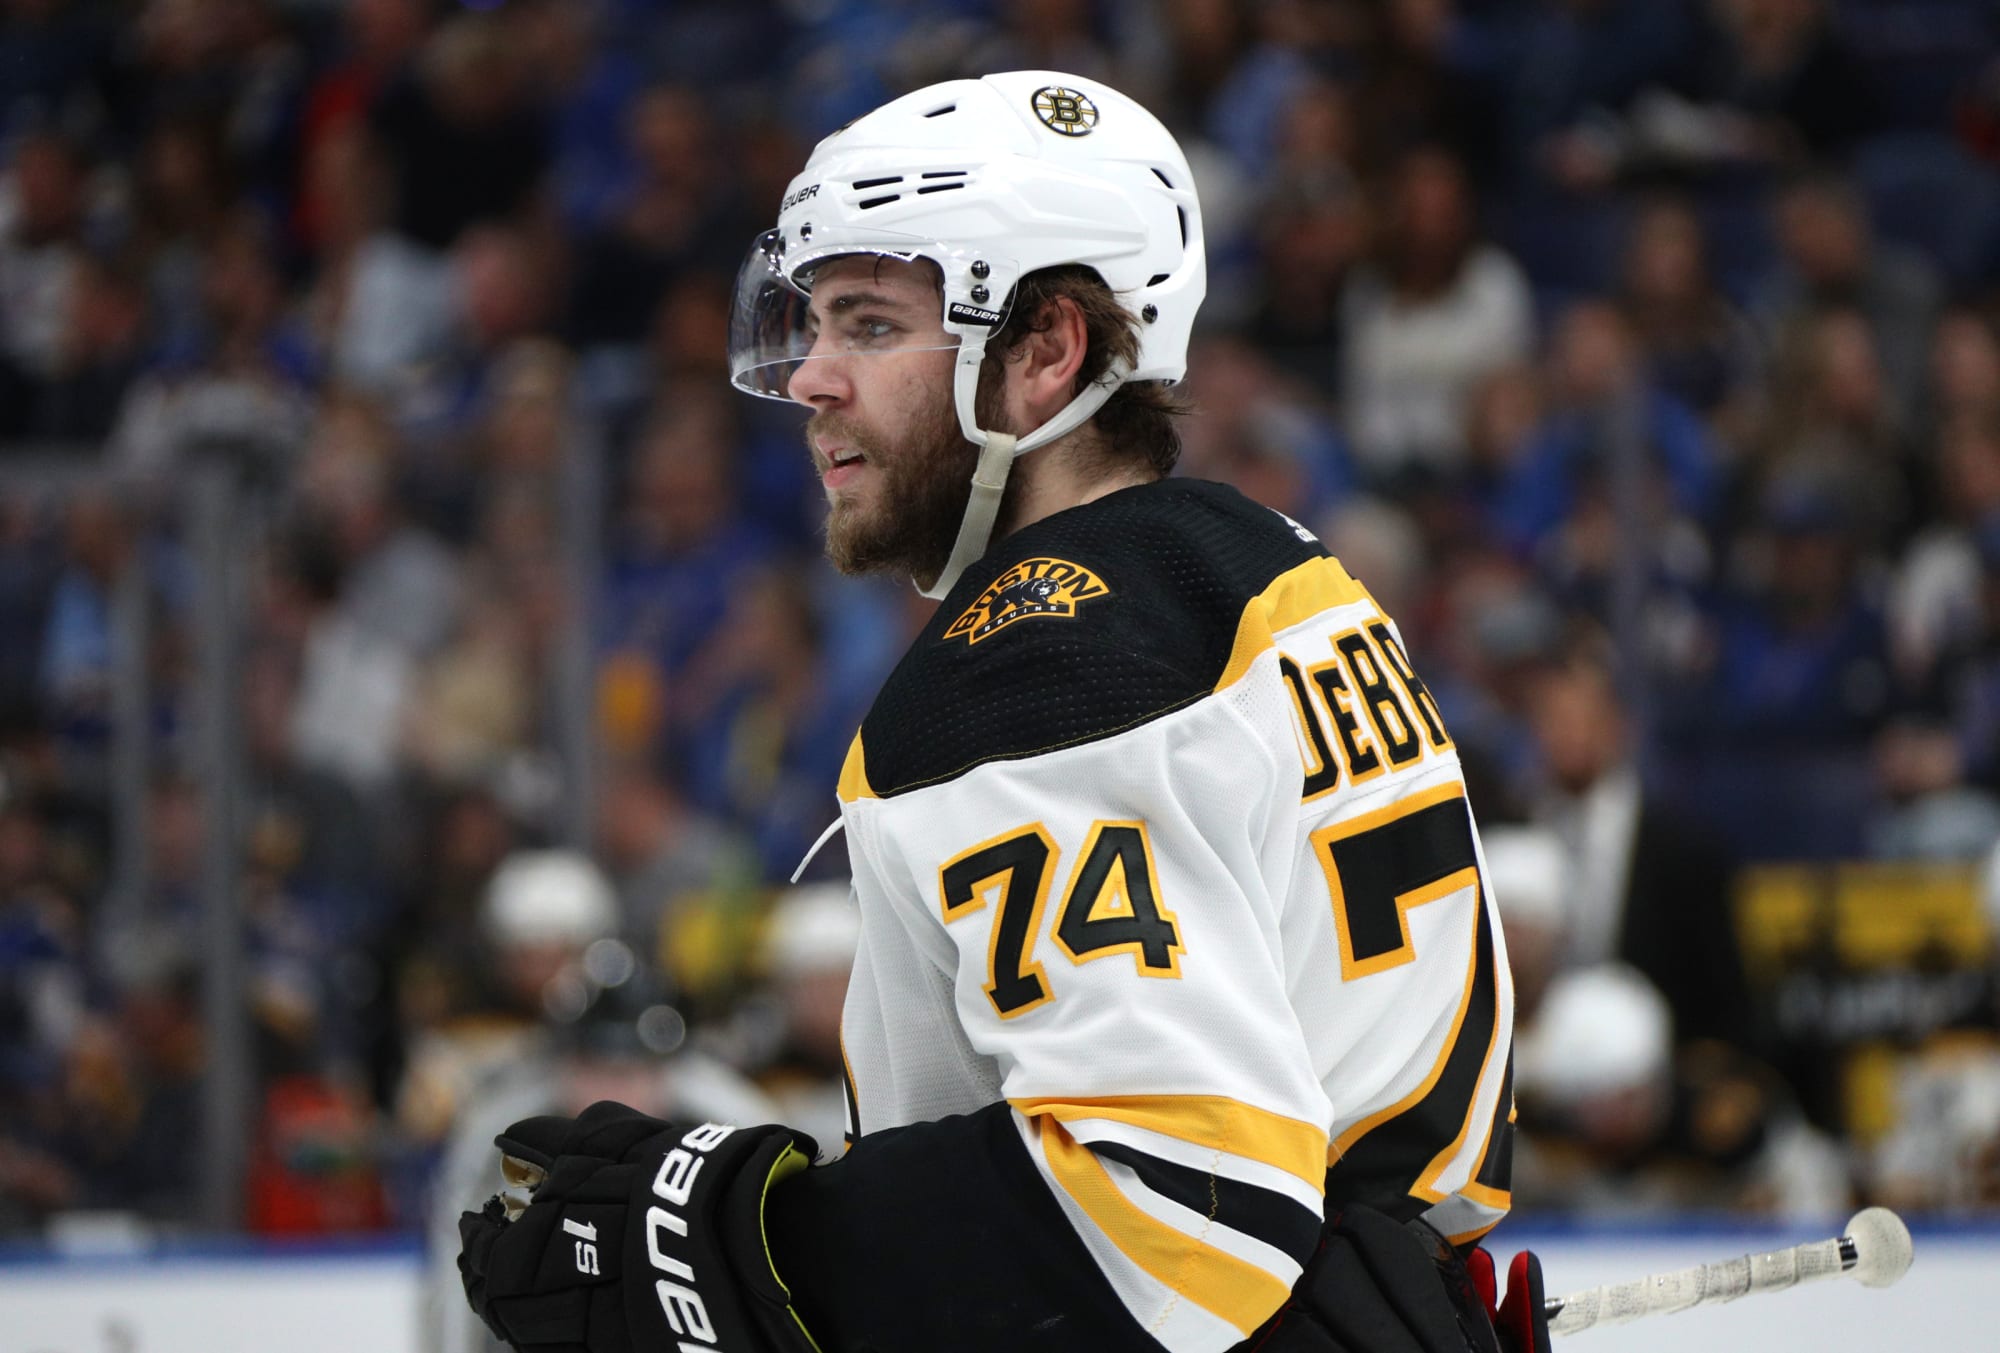 Jake DeBrusk has quite the routine when he arrives at any game for the  Bruins, Two 👀more 👀years 👀of 👀arrivals👀, By NESN